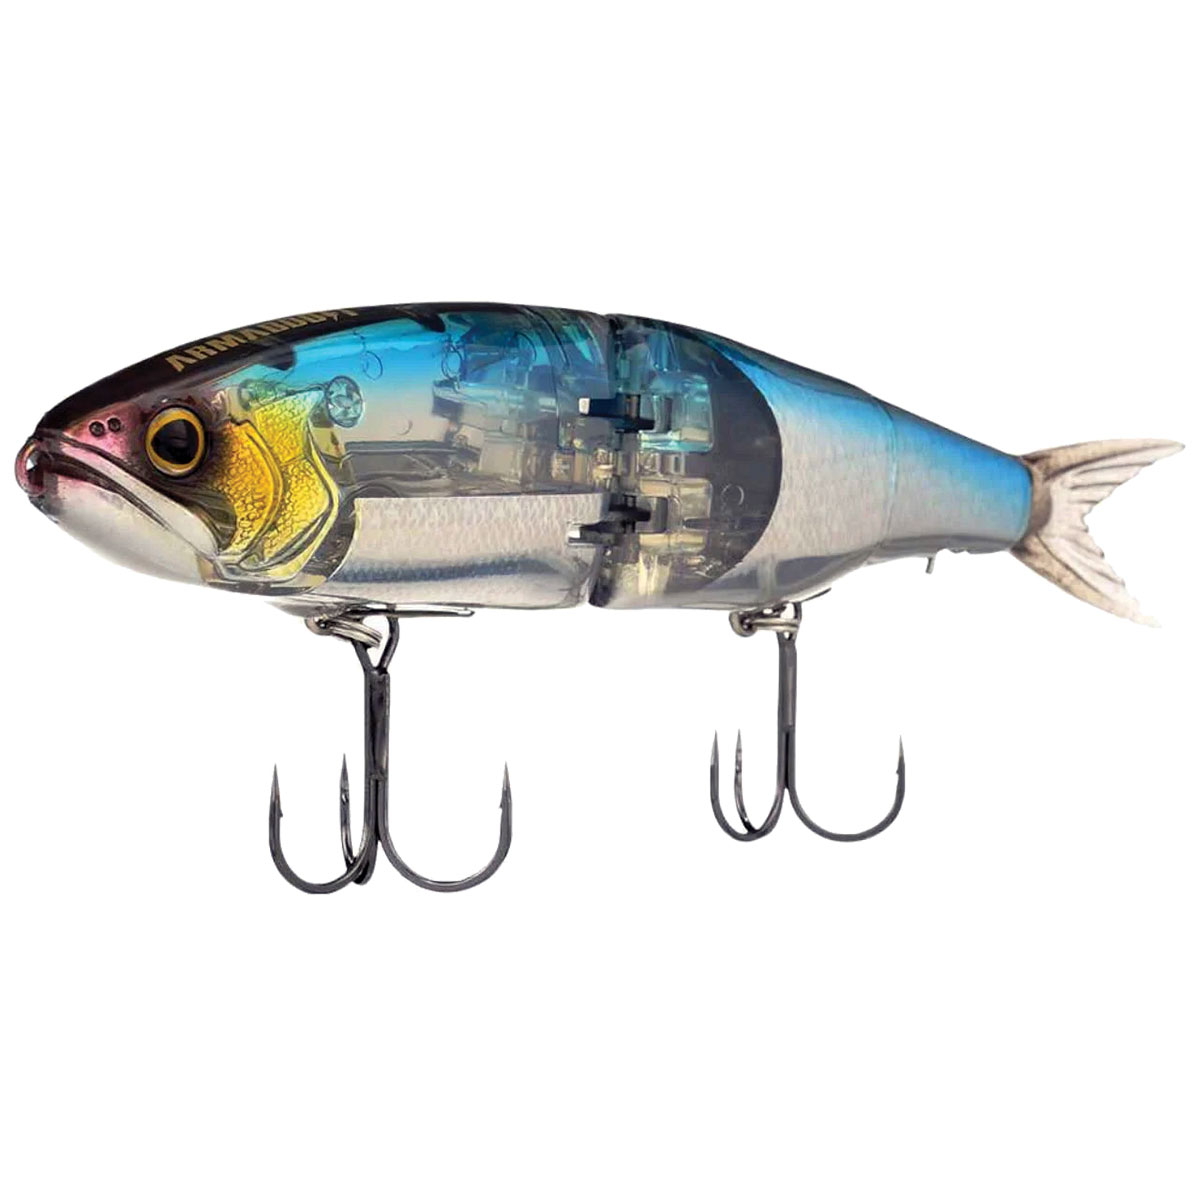 60 Fishy Gifts: 2023 Holiday Gift Guide - The Fisherman